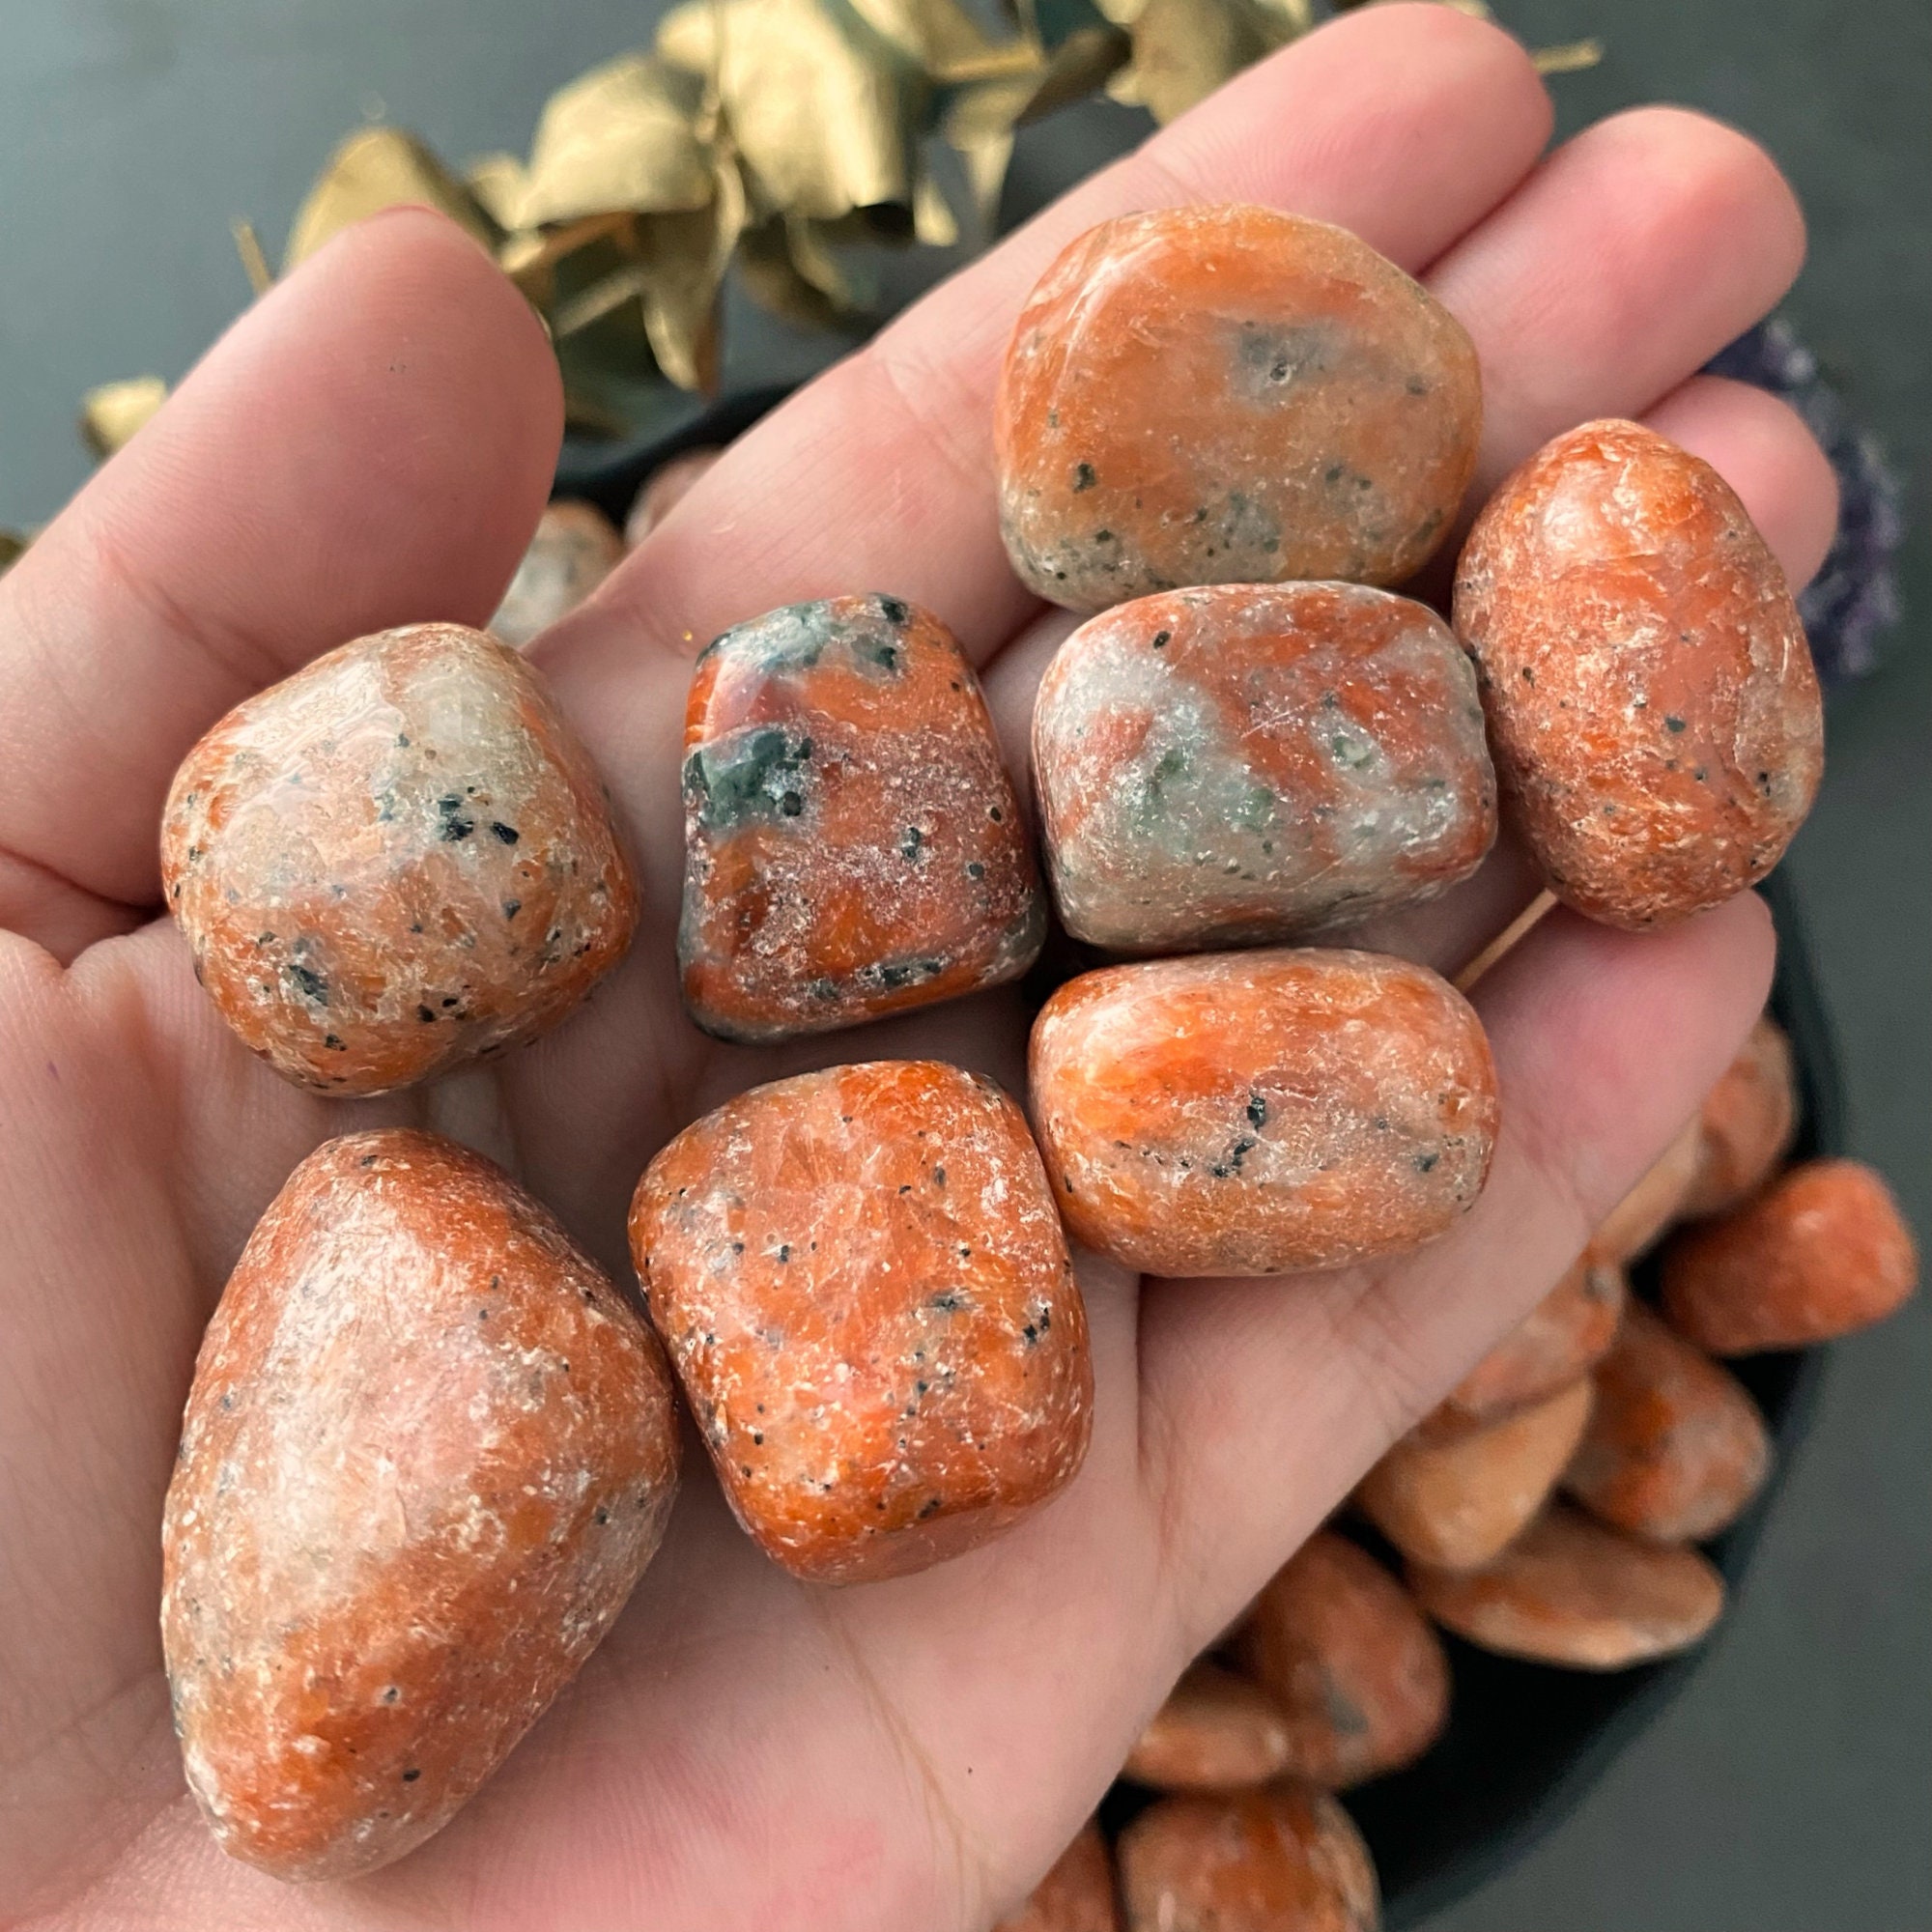 1 Piece Loose Stones Small Natural Crystals Orange Orchid Calcite Tumbled Stone Polished Gemstones Rocks Reiki and Chakras Meditation